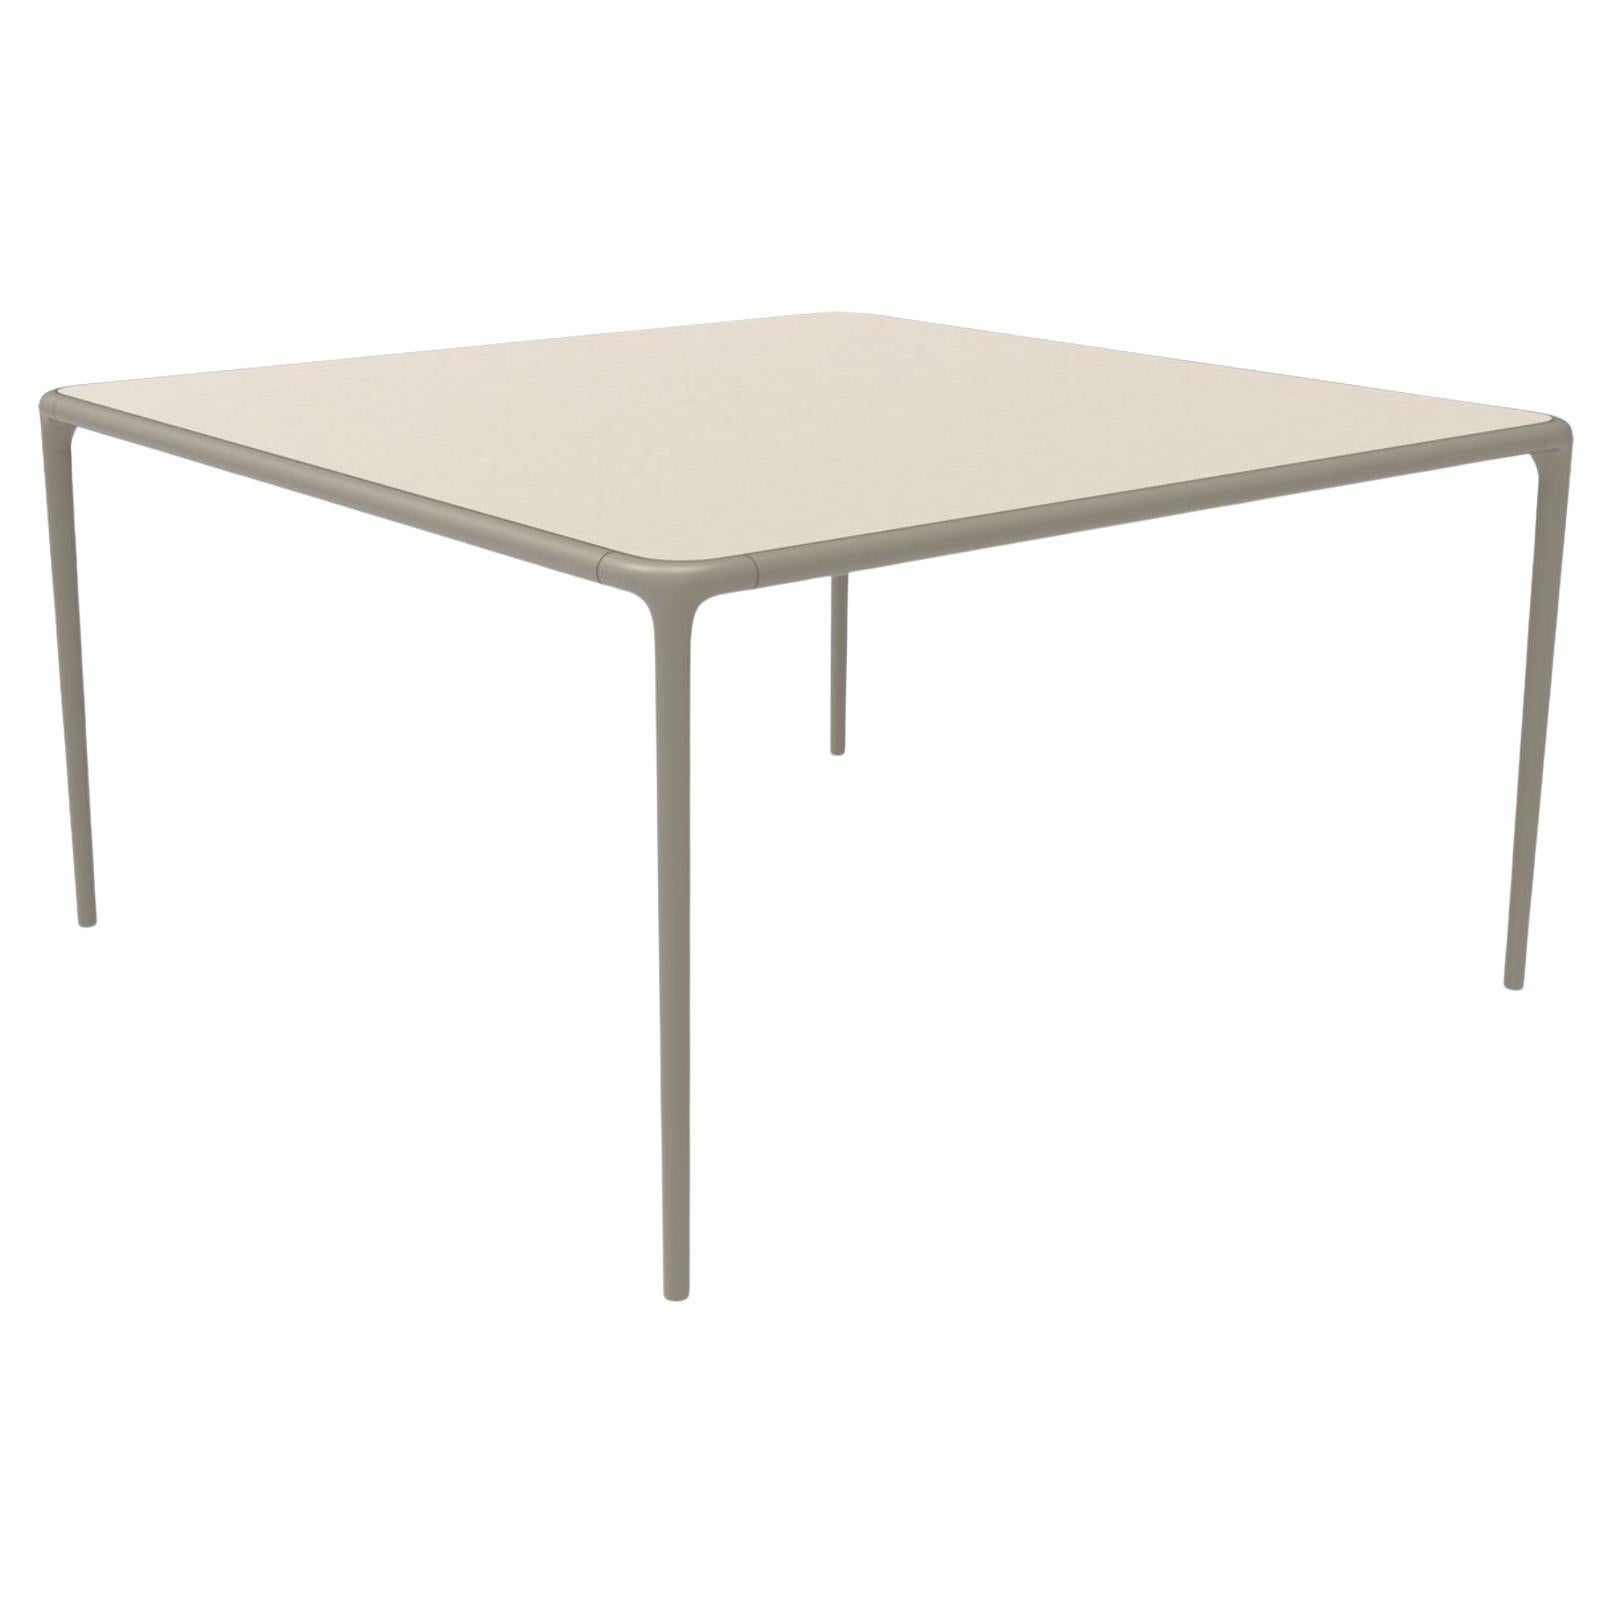 Xaloc Cream Glass Top Table 140 by Mowee For Sale